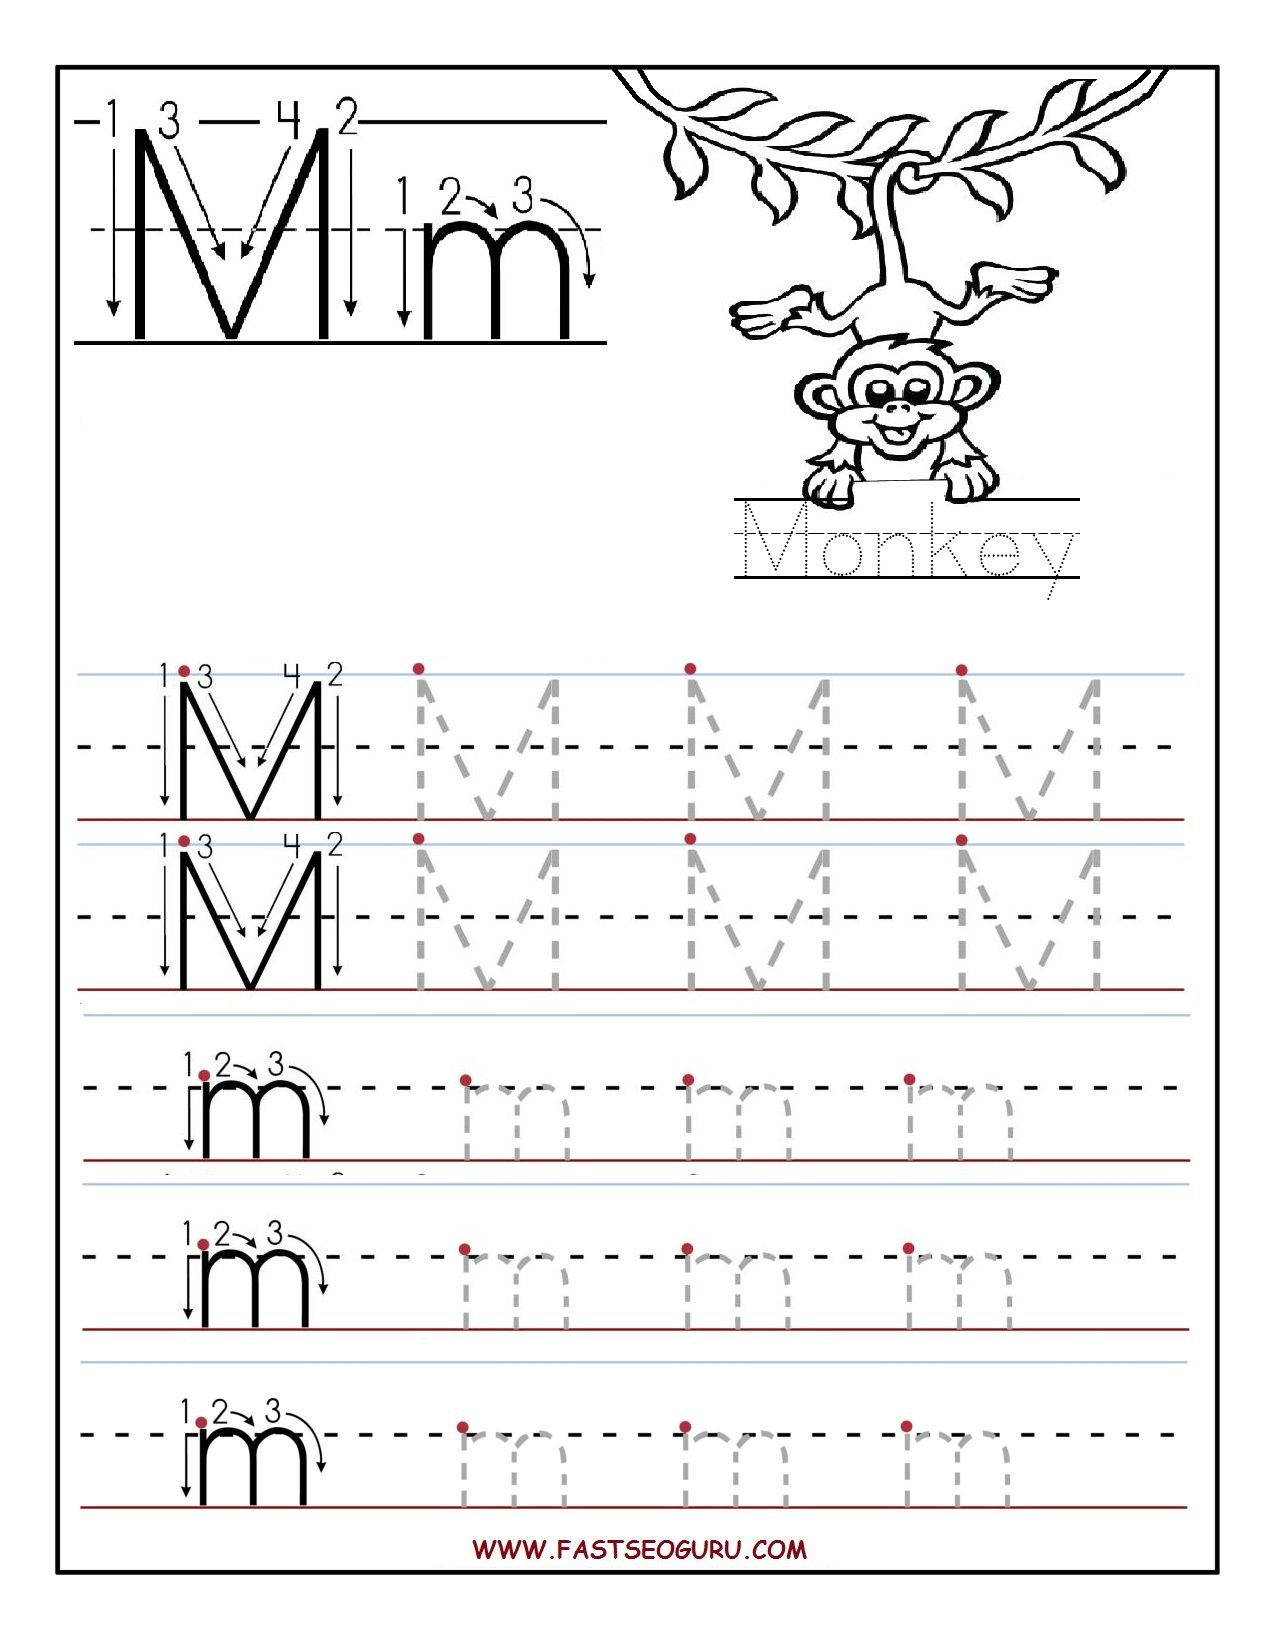 Printable Letter M Tracing Worksheets For Preschool regarding Tracing Letter M Worksheets